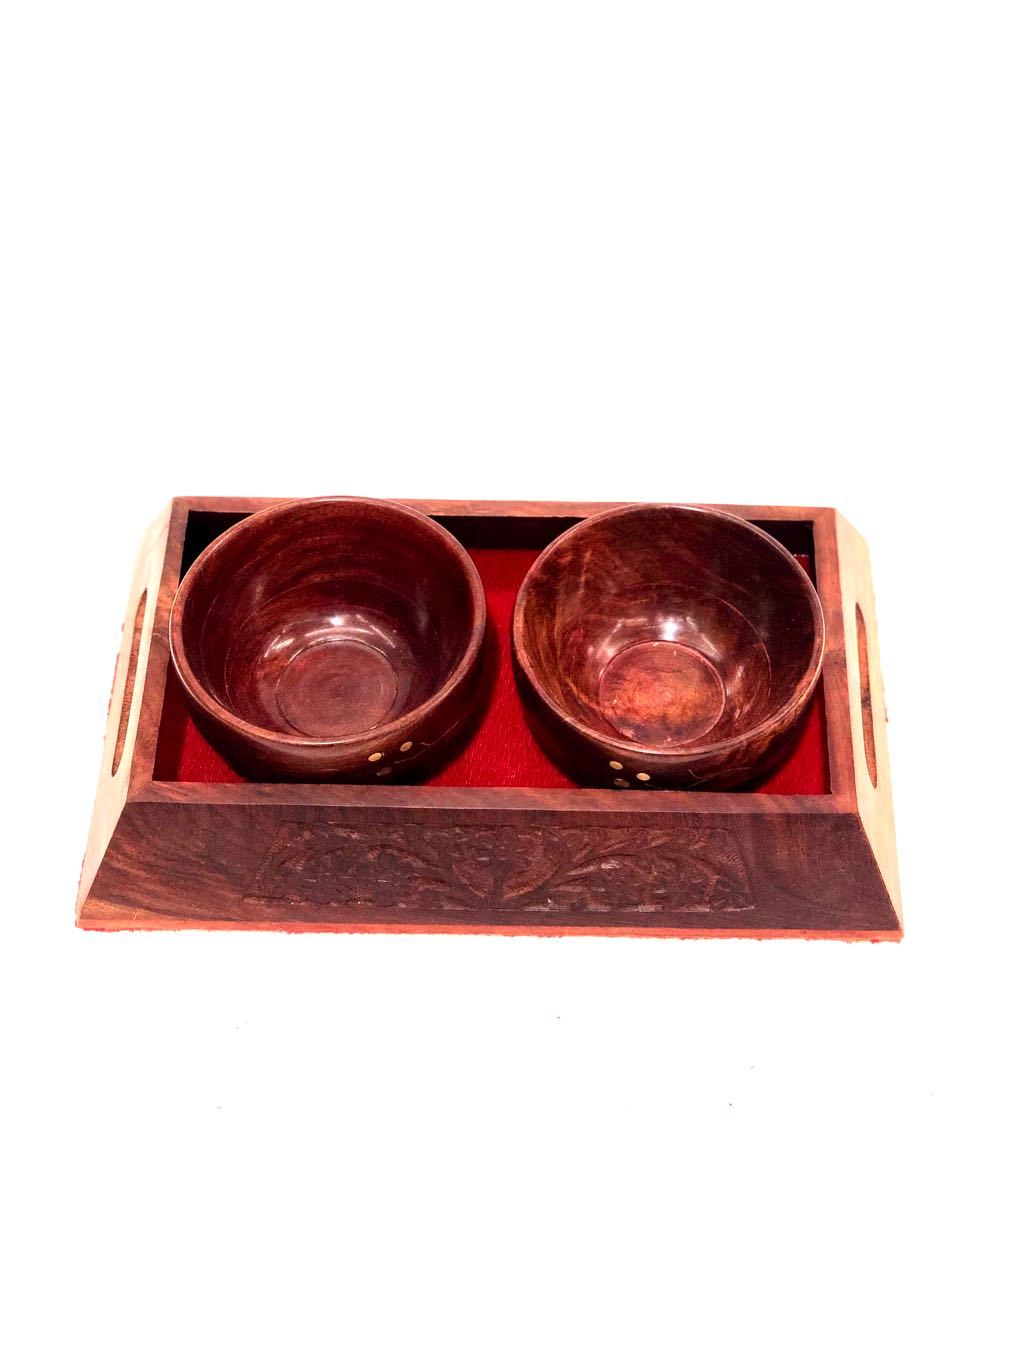 Red Velvet Tray Wooden Carved With 2 Bowls Gifting Ideas By Tamrapatra - Tanariri Hastakala